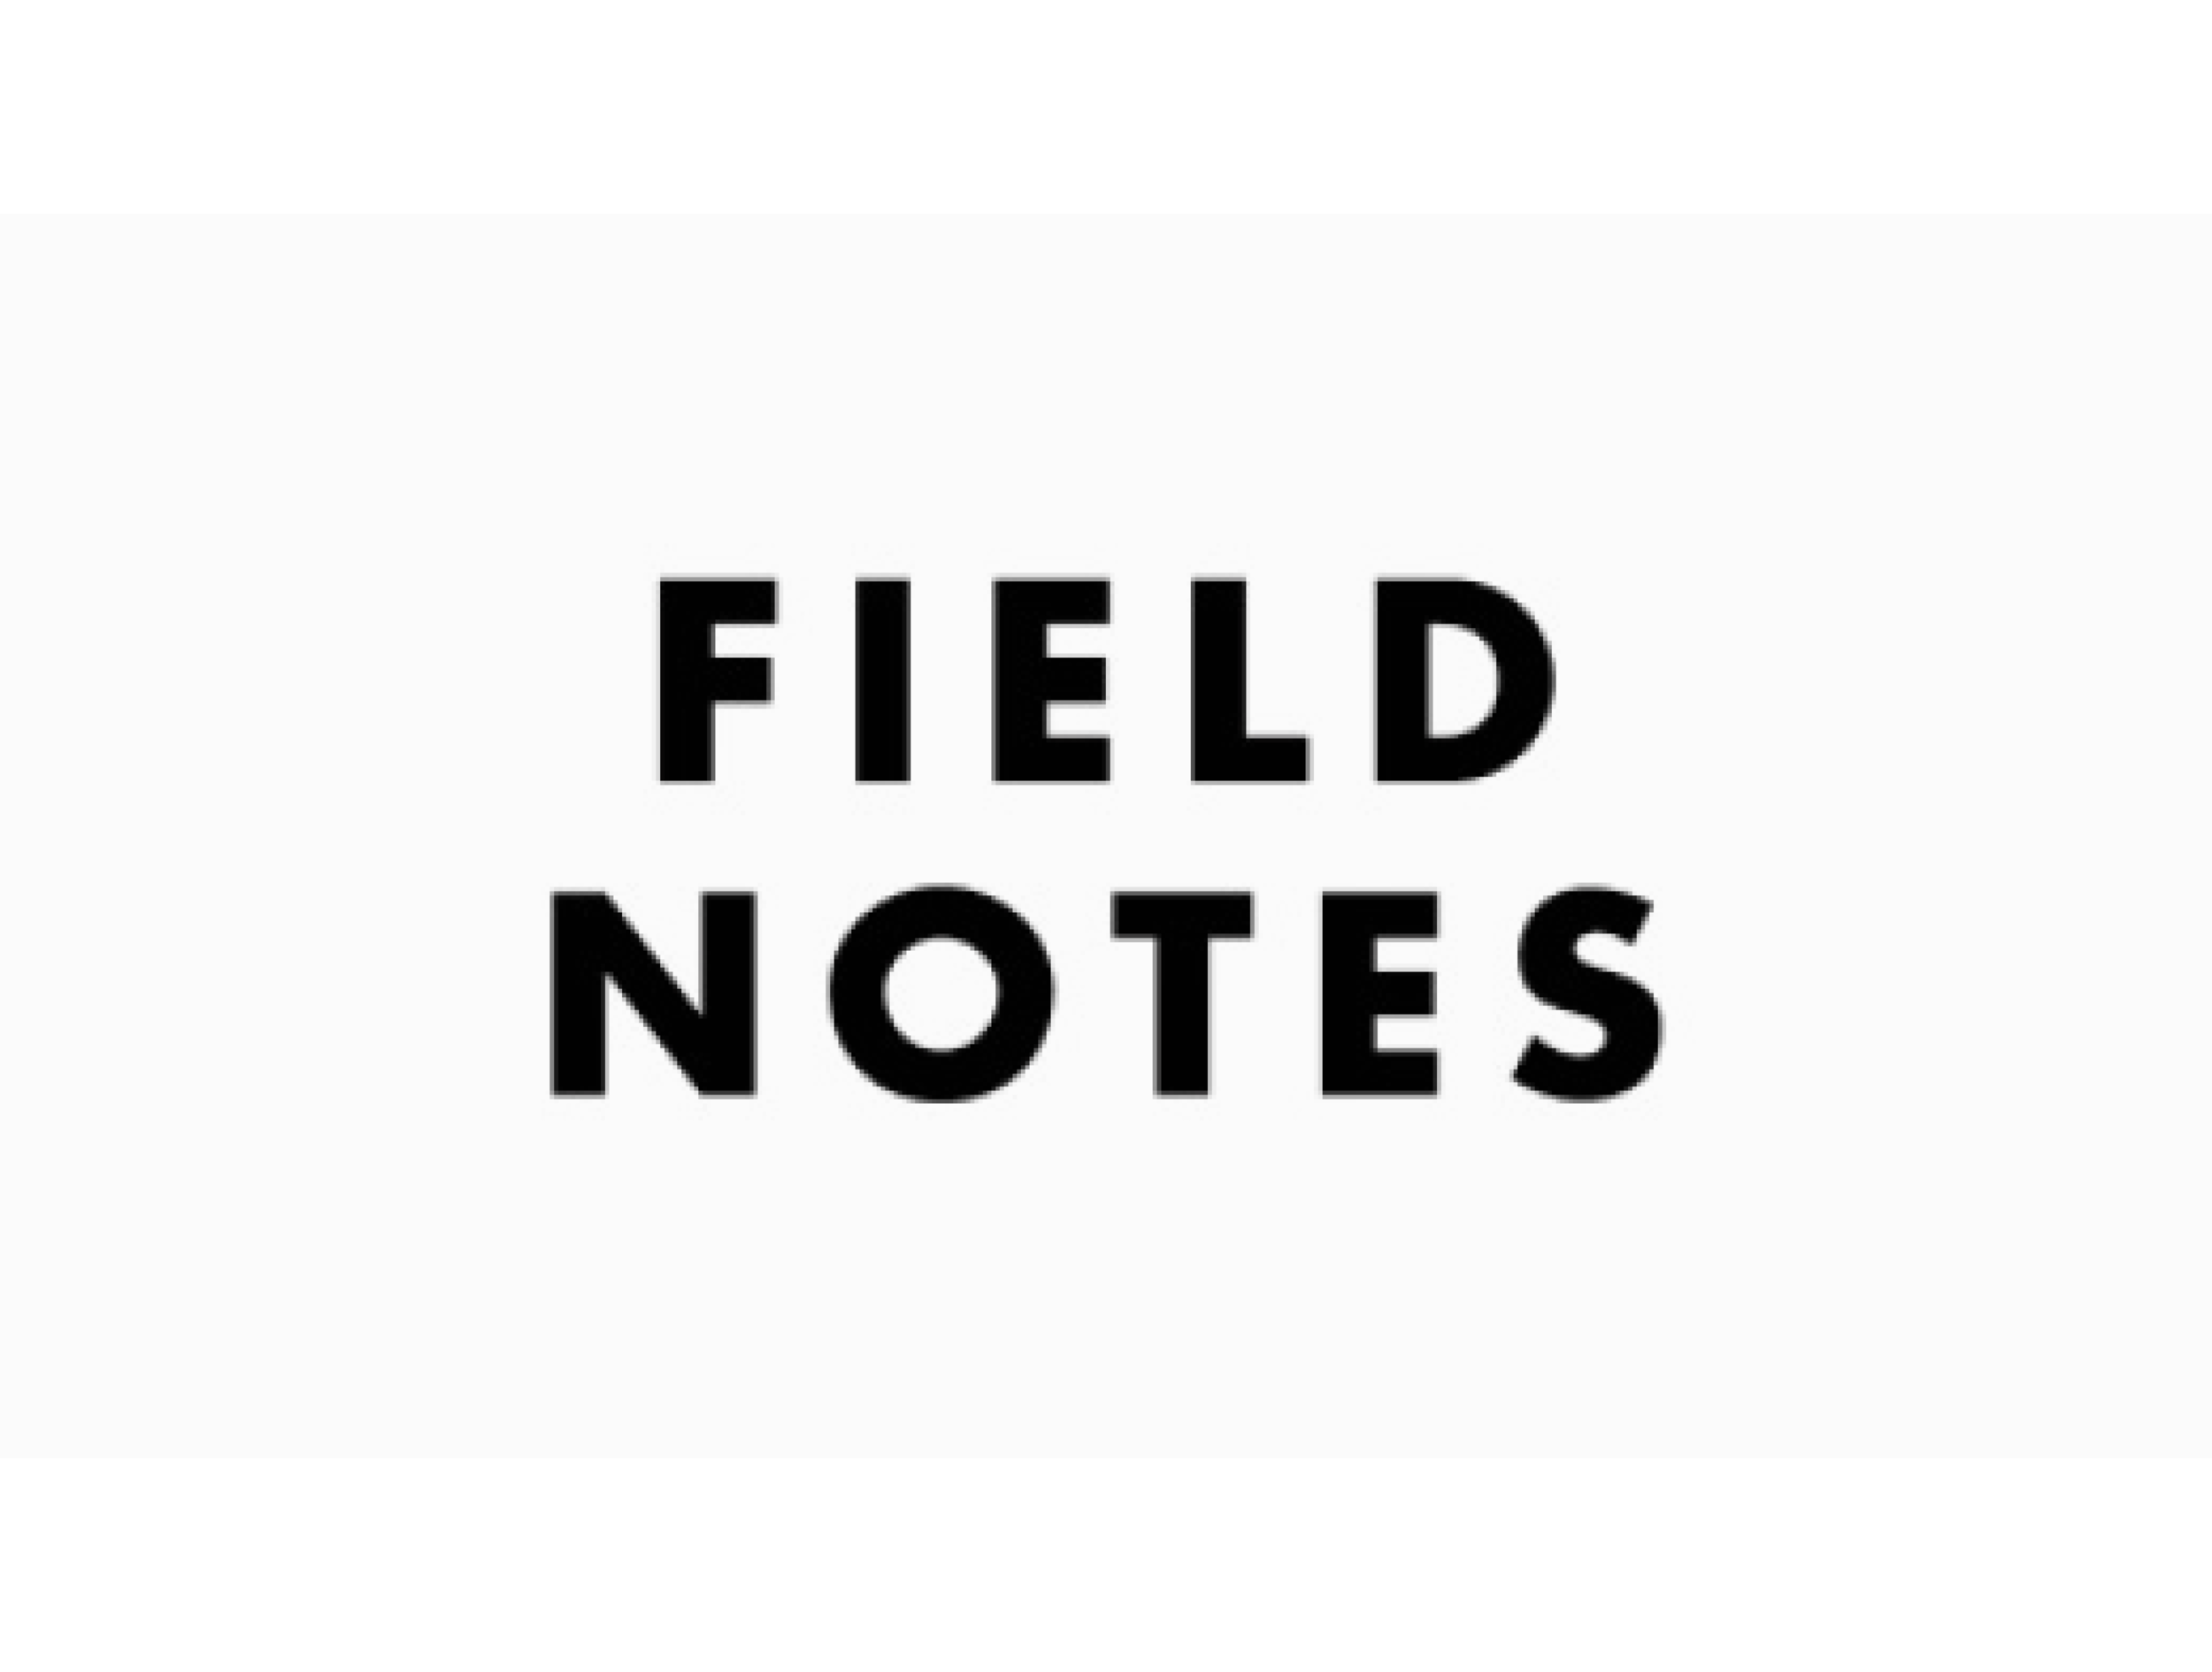 Field Notes logo 2.png